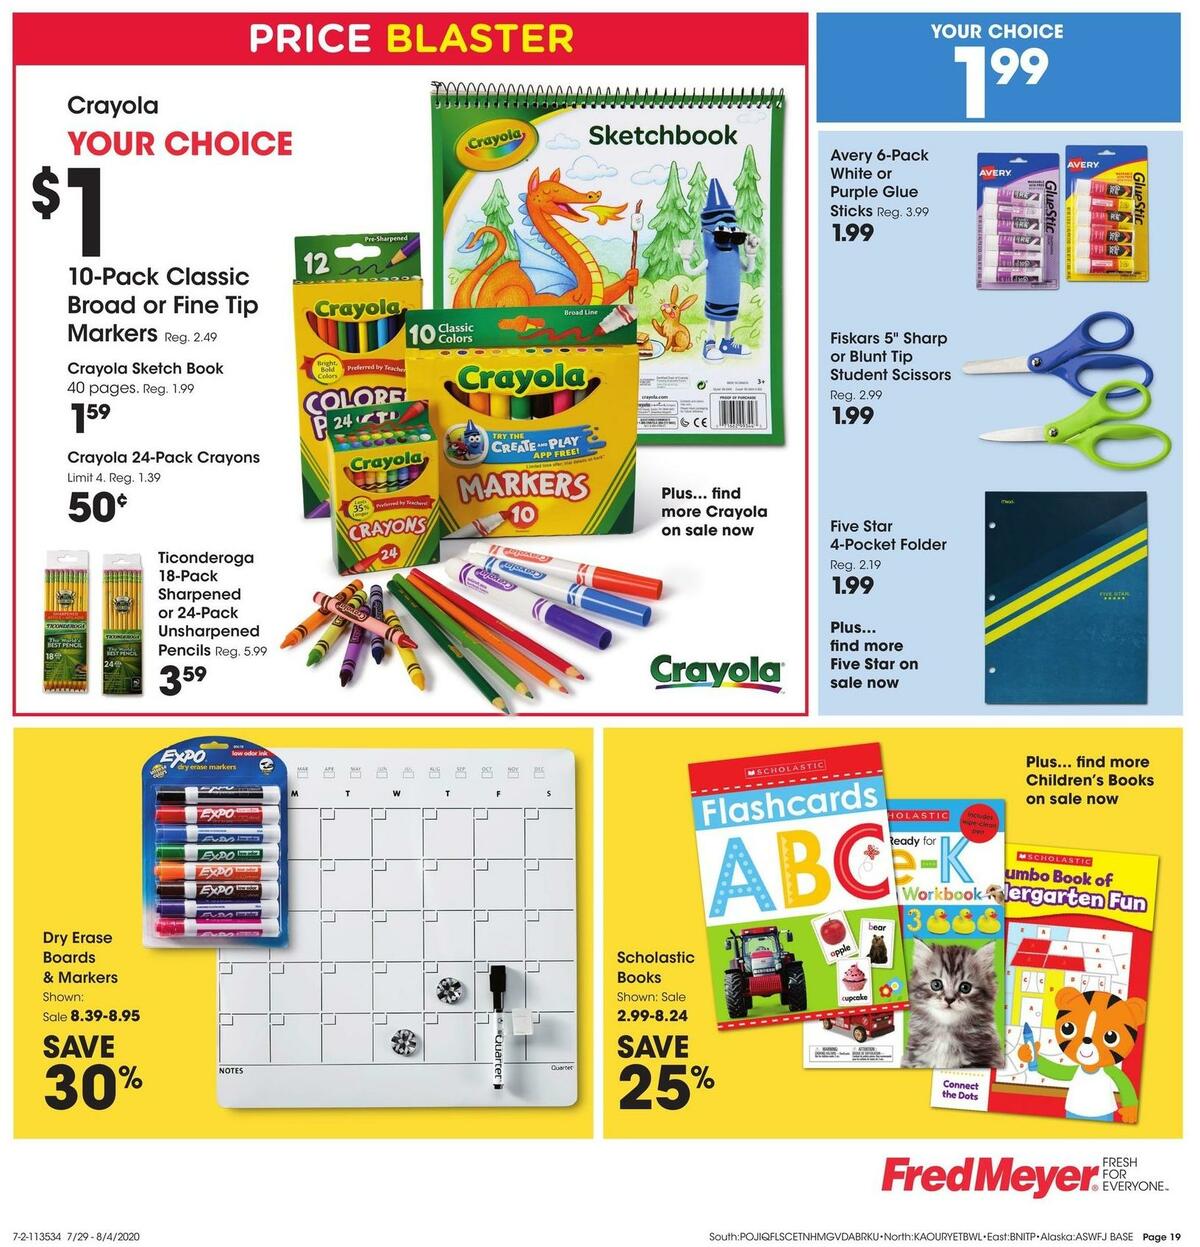 Fred Meyer General Merchandise Weekly Ad from July 29